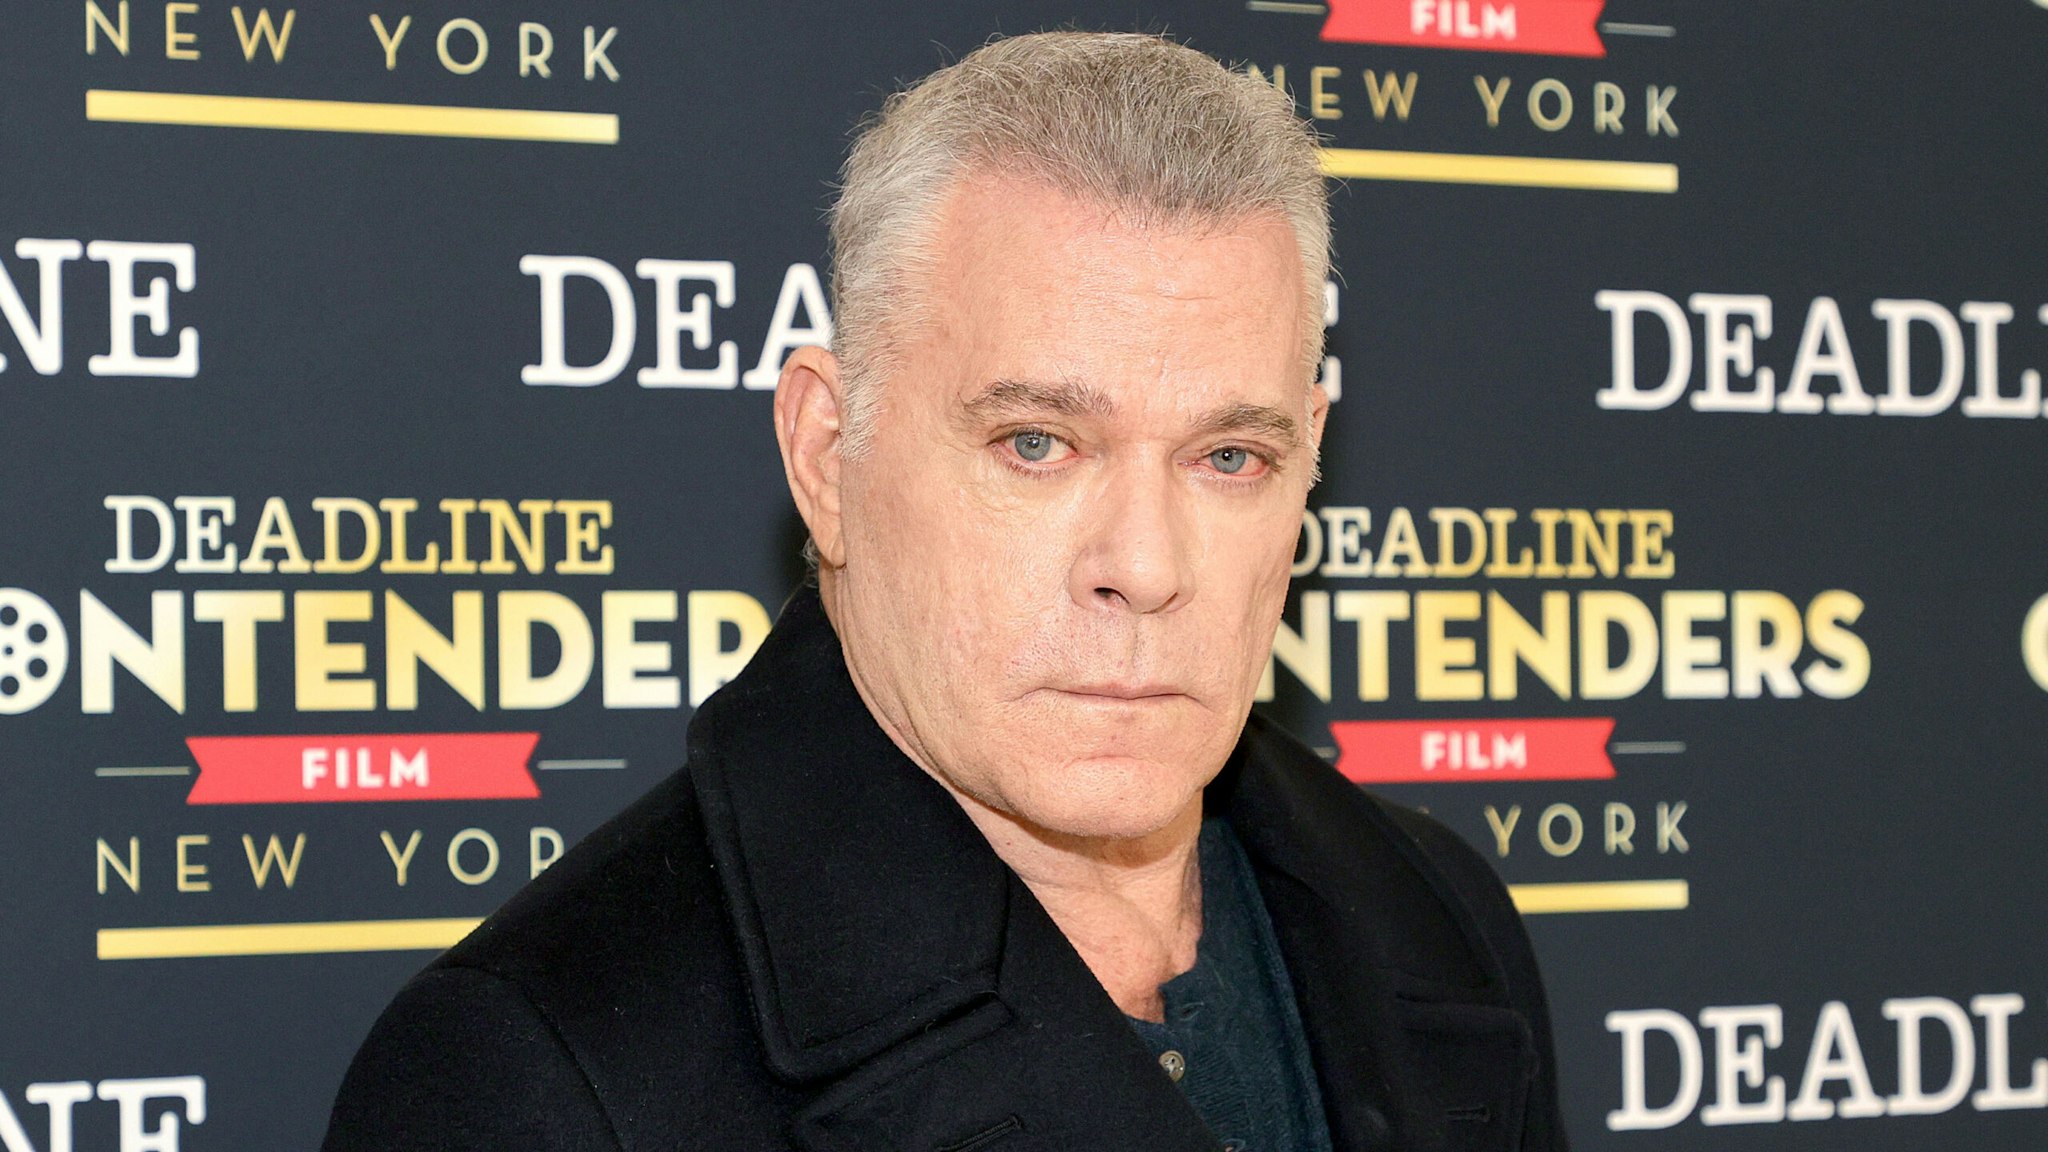 NEW YORK, NEW YORK - DECEMBER 04: Actor Ray Liotta from Warner Bros. Pictures' "The Many Saints of Newark" attends Deadline Contenders Film: New York on December 04, 2021 in New York City.